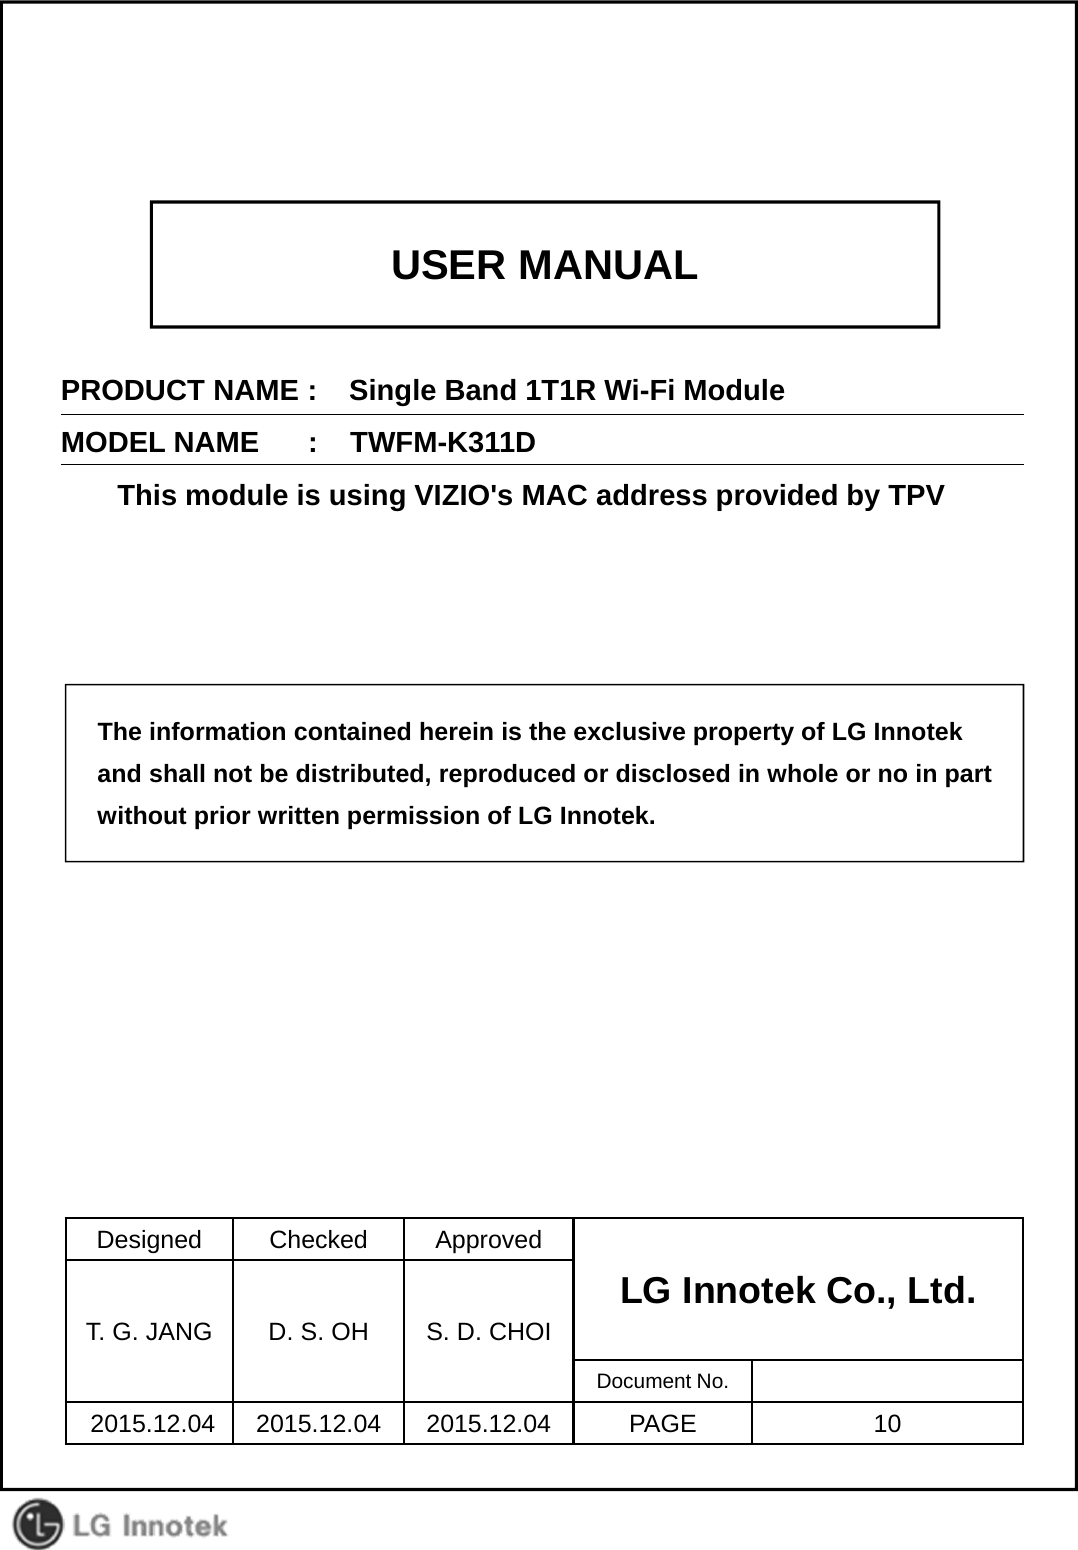 USER MANUALPRODUCT NAME :    Single Band 1T1R Wi-Fi ModuleMODEL NAME      :    TWFM-K311DThis module is using VIZIO&apos;s MAC address provided by TPVDesigned Checked ApprovedLG Innotek Co., Ltd.   T. G. JANG D. S. OH S. D. CHOIDocument No.2015.12.04 2015.12.04 2015.12.04 PAGE 10The information contained herein is the exclusive property of LG Innotekand shall not be distributed, reproduced or disclosed in whole or no in partwithout prior written permission of LG Innotek.